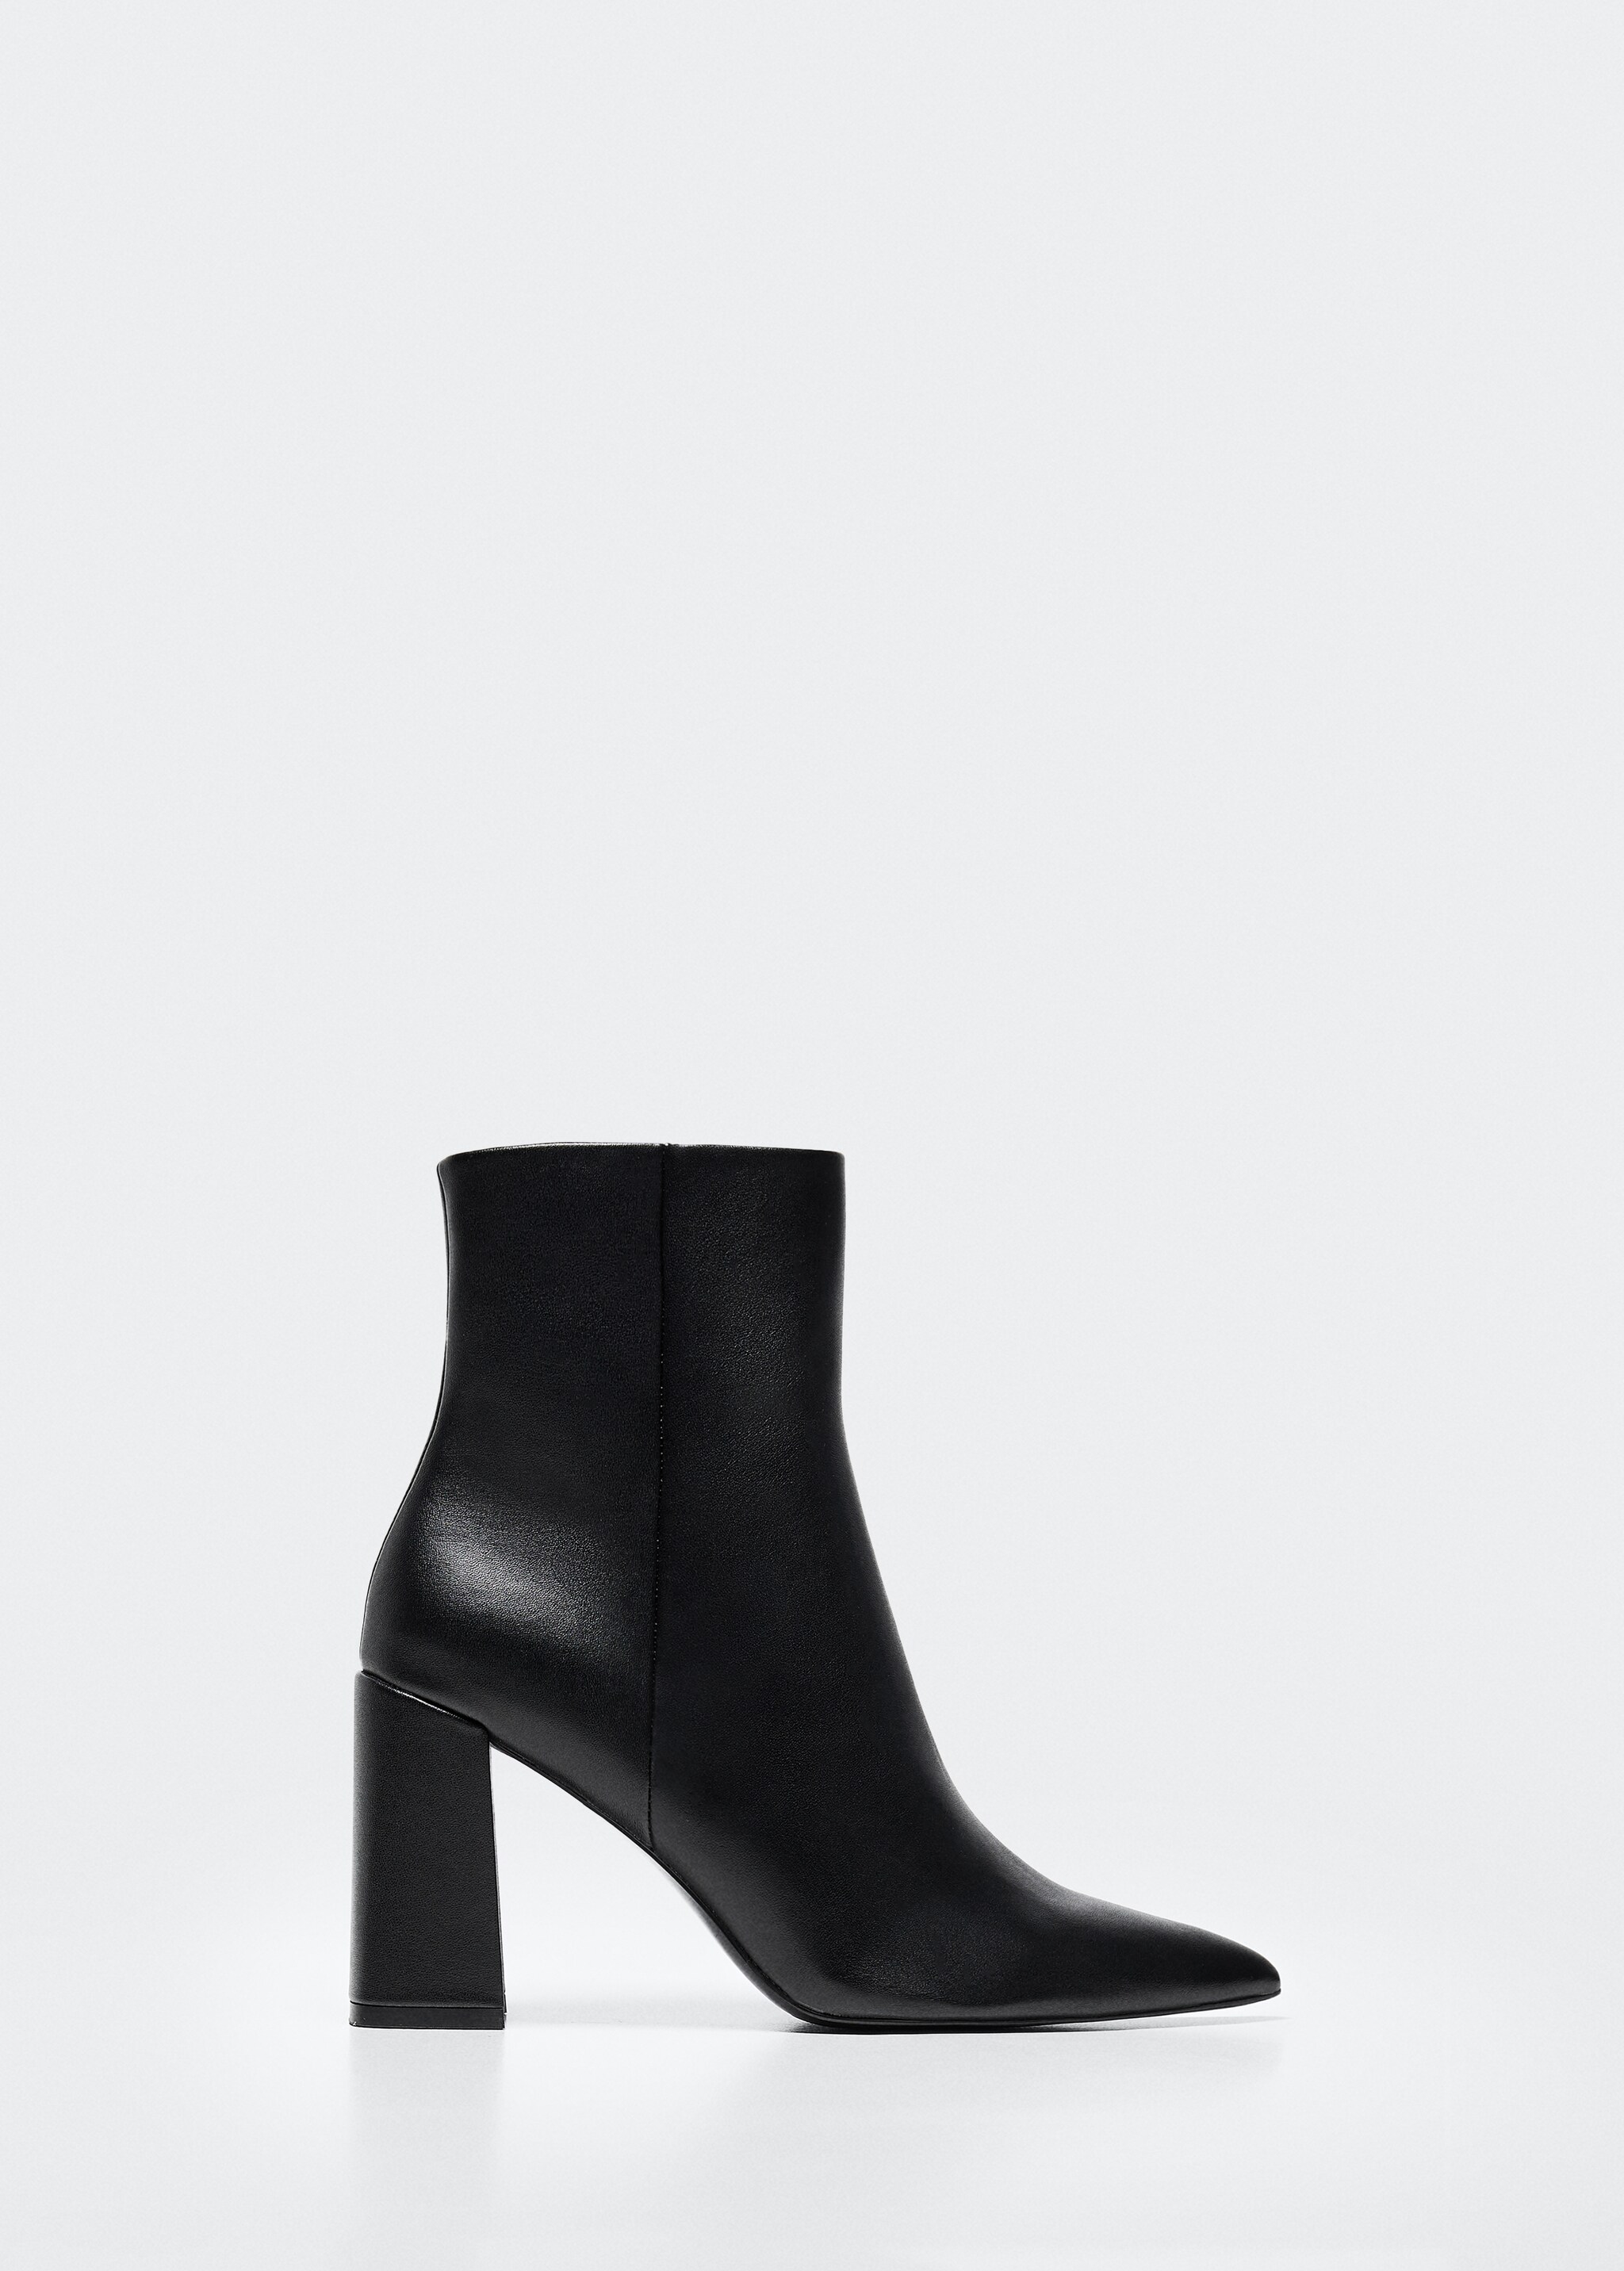 Ankle boots with block heel - Article without model